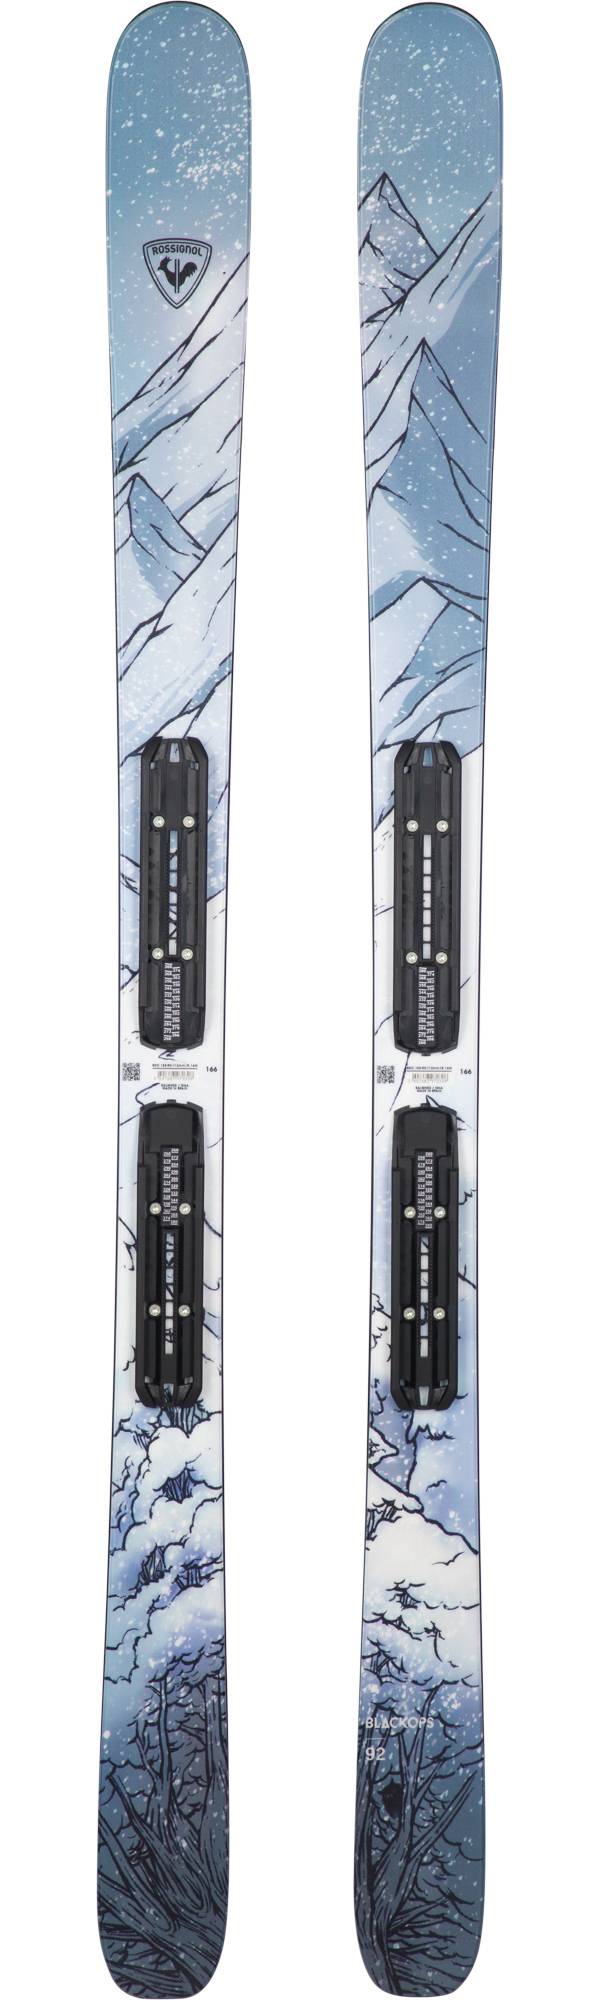 Rossignol Blackops Day 92 XPRS11GW Ski Package product image